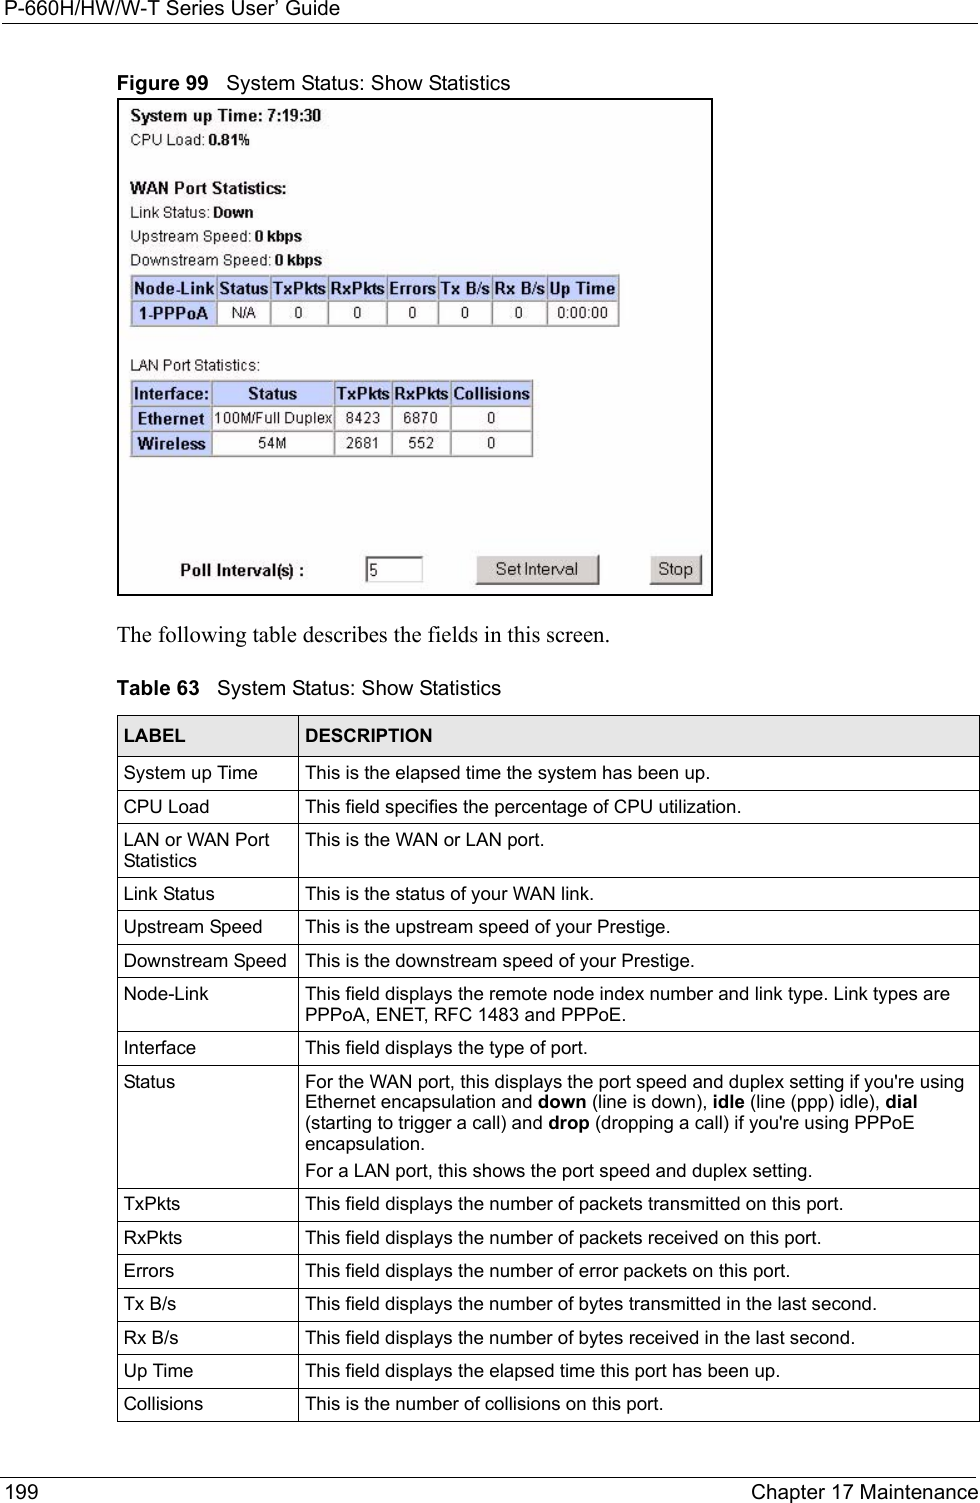 P-660H/HW/W-T Series User’ Guide199 Chapter 17 MaintenanceFigure 99   System Status: Show StatisticsThe following table describes the fields in this screen.  Table 63   System Status: Show StatisticsLABEL DESCRIPTIONSystem up Time This is the elapsed time the system has been up.CPU Load This field specifies the percentage of CPU utilization.LAN or WAN Port StatisticsThis is the WAN or LAN port.Link Status This is the status of your WAN link.Upstream Speed This is the upstream speed of your Prestige.Downstream Speed  This is the downstream speed of your Prestige.Node-Link This field displays the remote node index number and link type. Link types are PPPoA, ENET, RFC 1483 and PPPoE.Interface This field displays the type of port.Status  For the WAN port, this displays the port speed and duplex setting if you&apos;re using Ethernet encapsulation and down (line is down), idle (line (ppp) idle), dial (starting to trigger a call) and drop (dropping a call) if you&apos;re using PPPoE encapsulation.For a LAN port, this shows the port speed and duplex setting.TxPkts  This field displays the number of packets transmitted on this port.RxPkts  This field displays the number of packets received on this port.Errors This field displays the number of error packets on this port. Tx B/s  This field displays the number of bytes transmitted in the last second.Rx B/s This field displays the number of bytes received in the last second.Up Time  This field displays the elapsed time this port has been up. Collisions This is the number of collisions on this port.